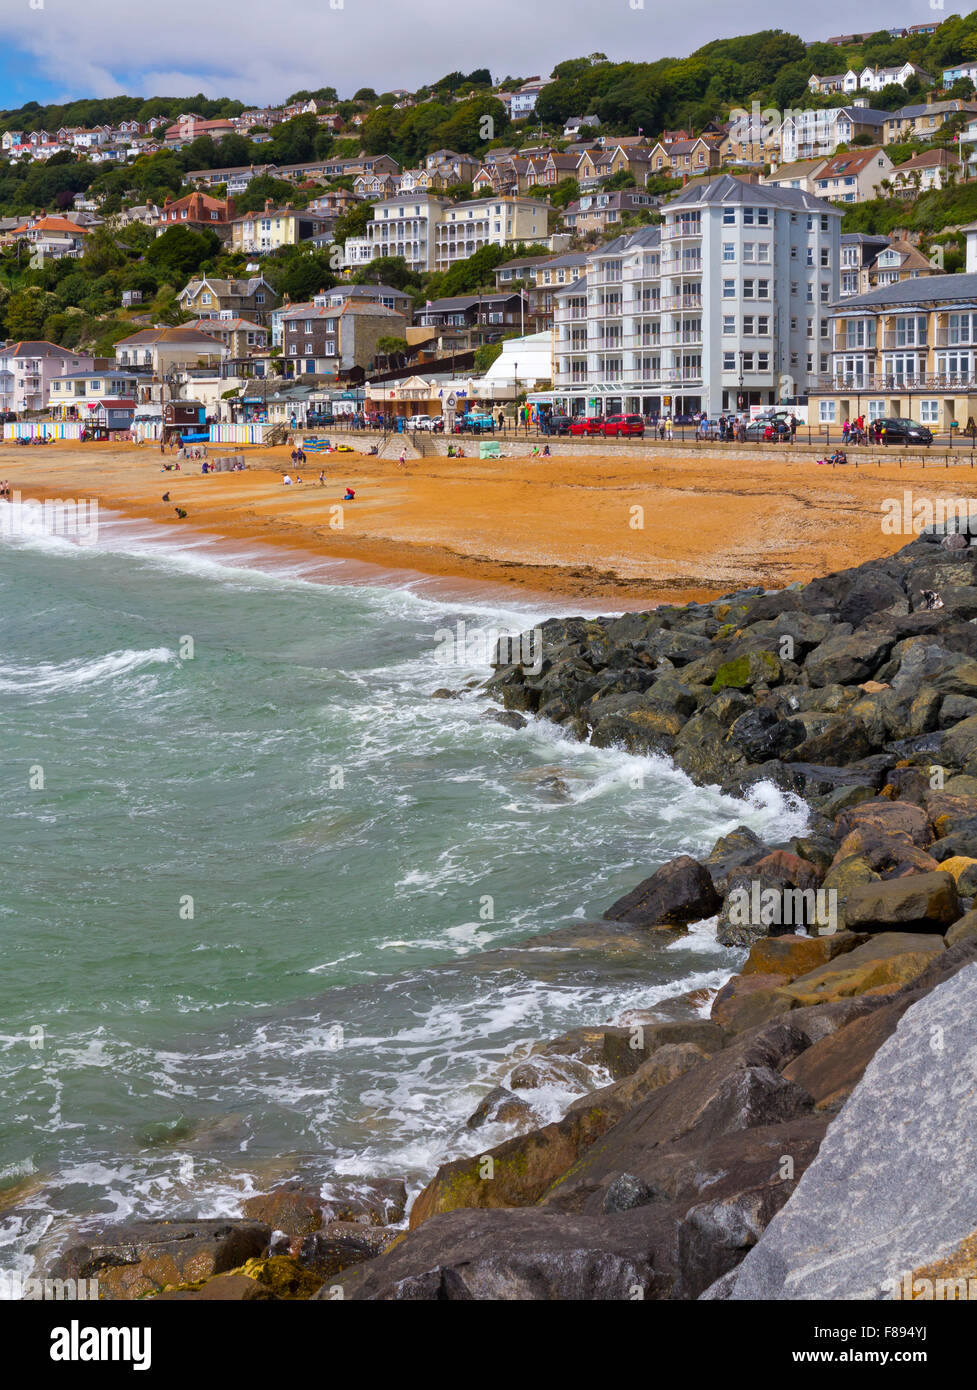 The beach at Ventnor a seaside resort on the south coast of the Isle of Wight in southern England UK Stock Photo